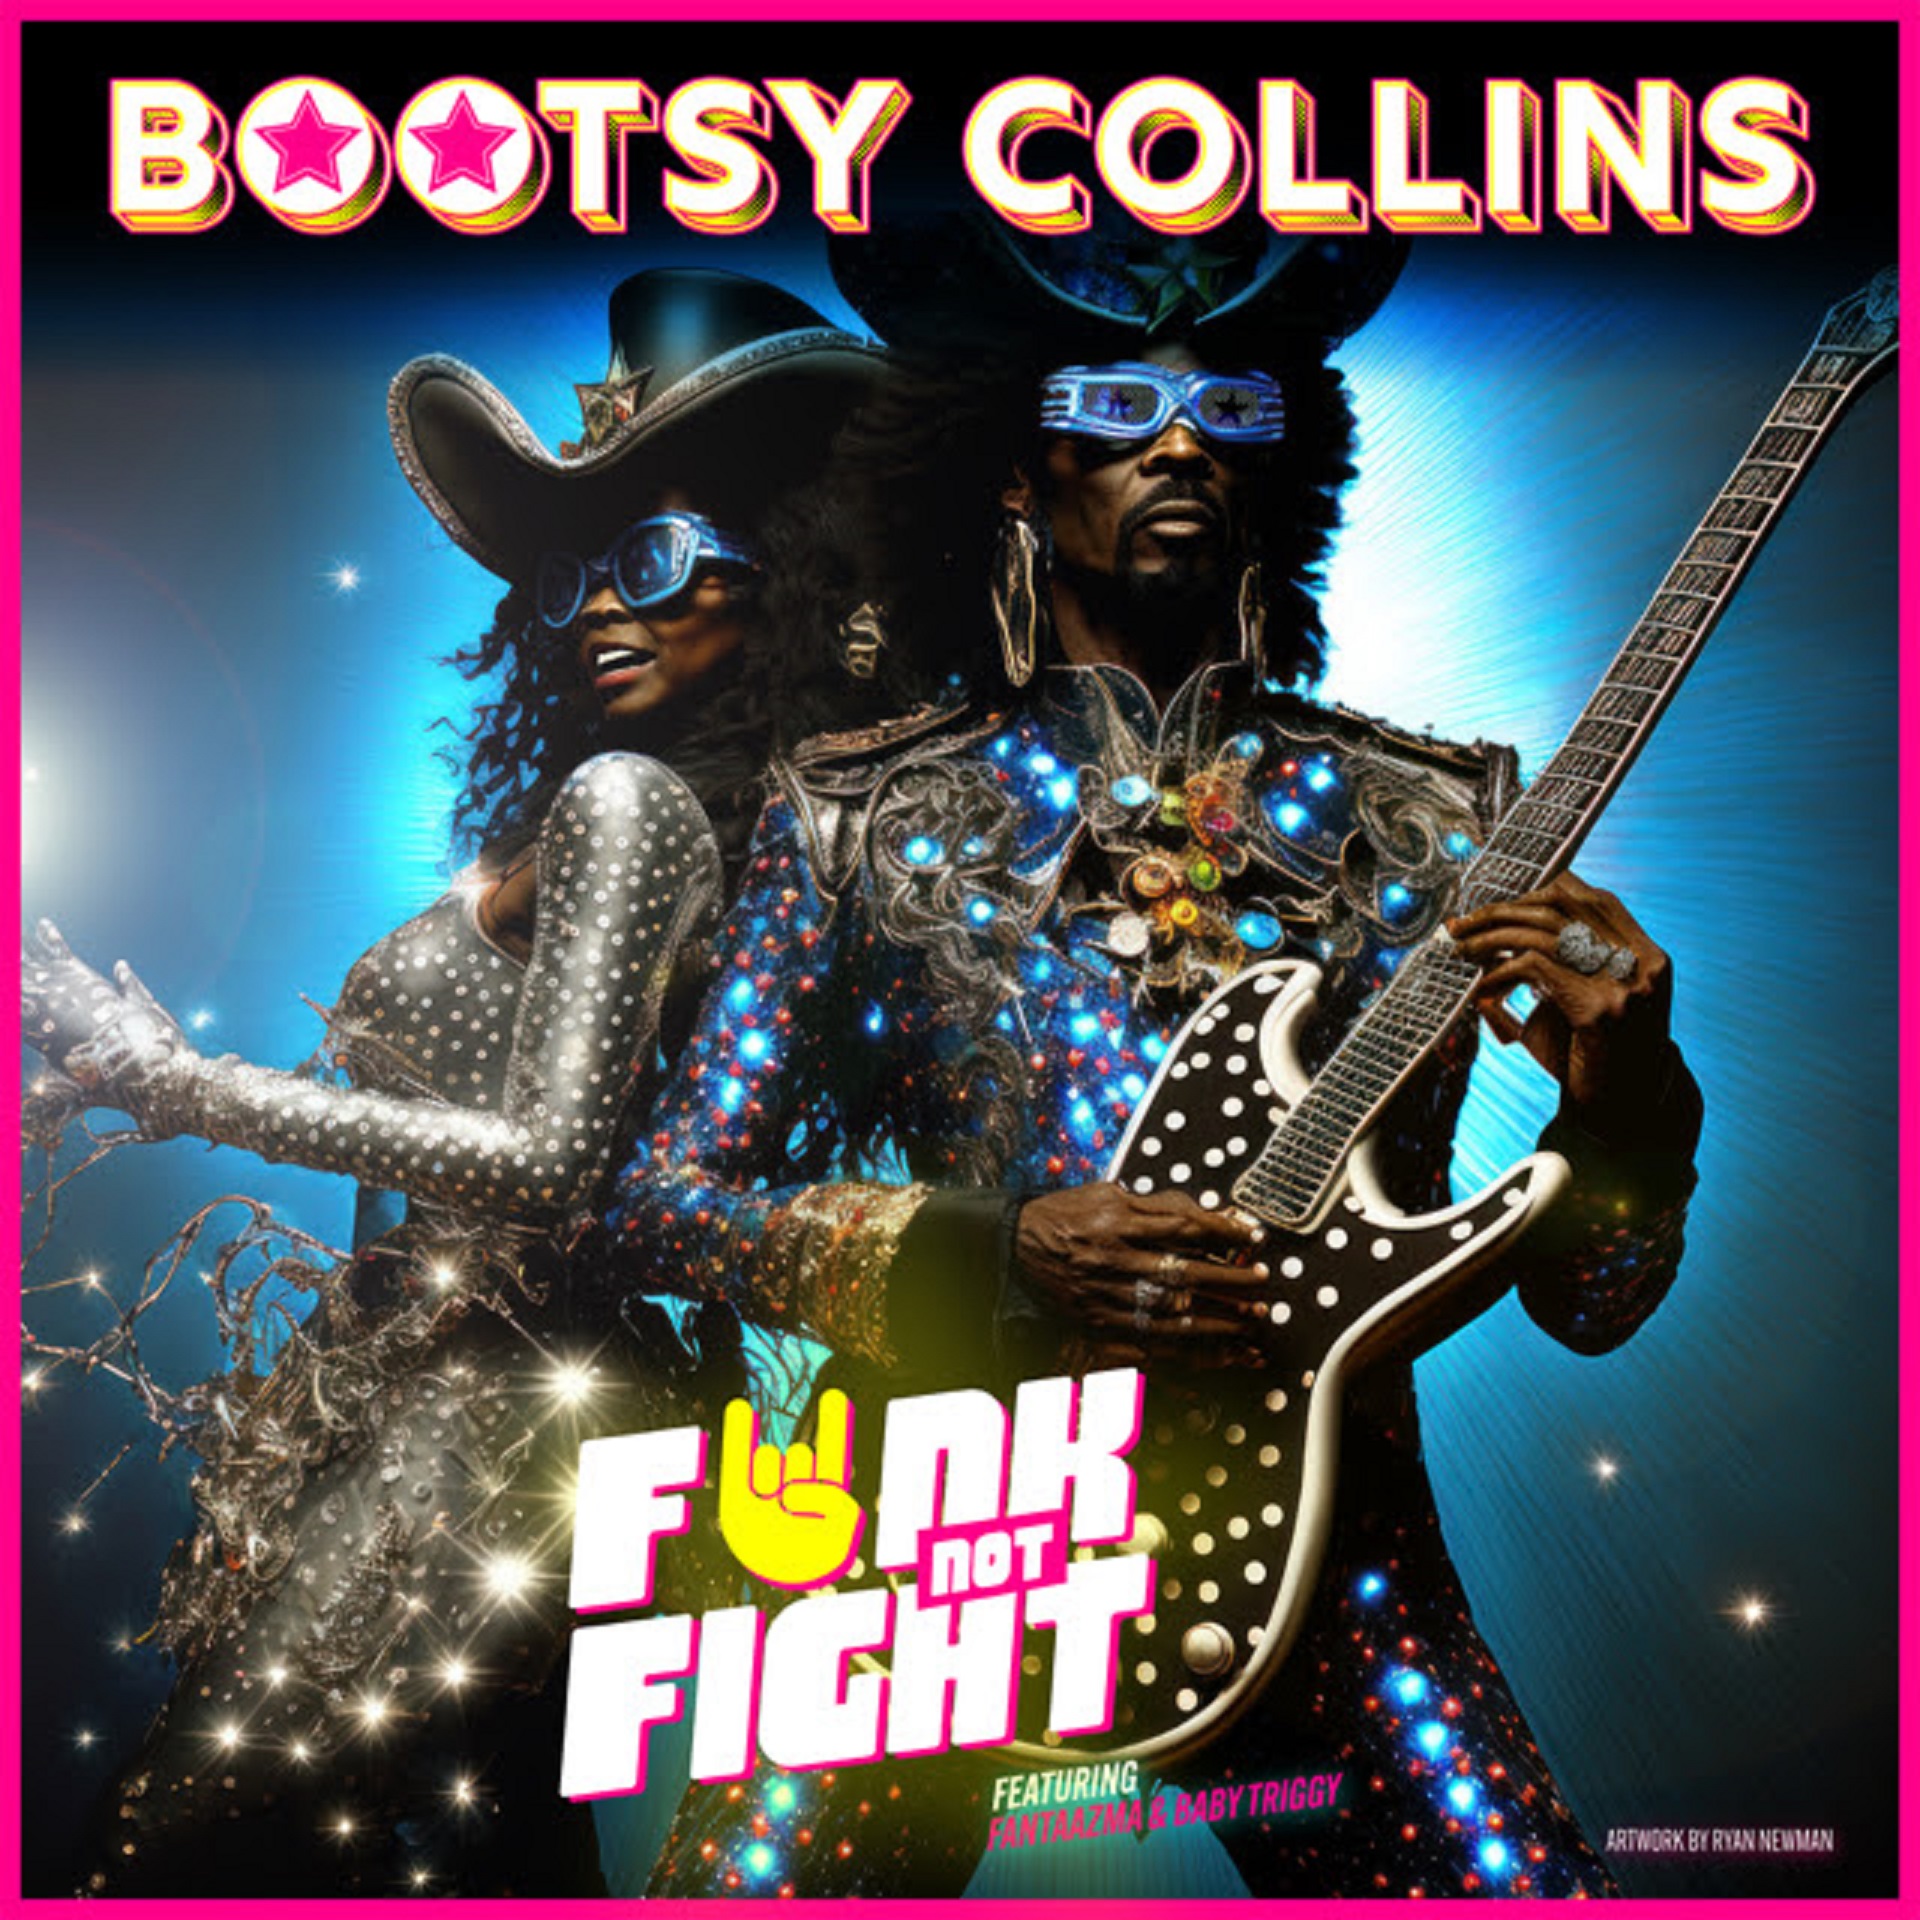 Bootsy Collins releases new single "Funk Not Fight"